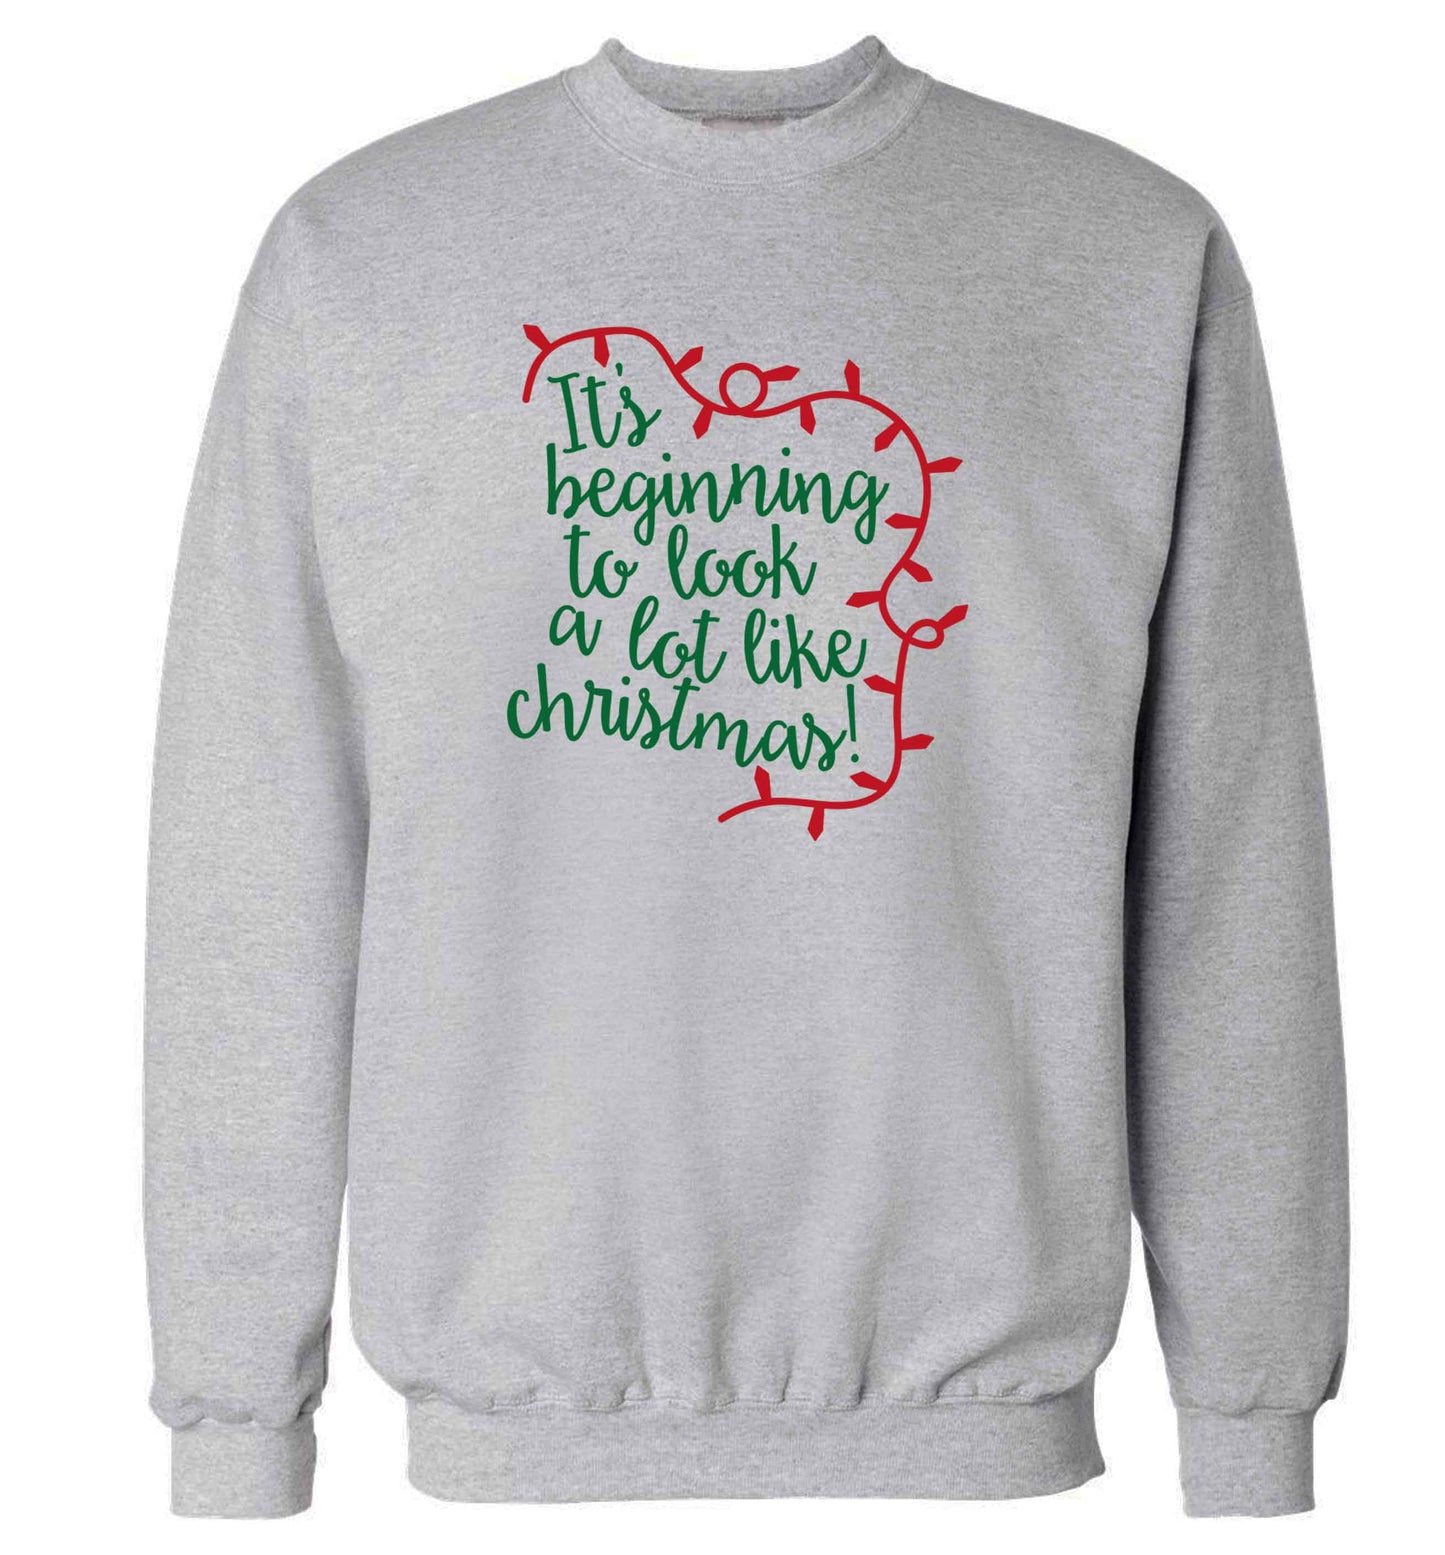 It's beginning to look a lot like Christmas adult's unisex grey sweater 2XL